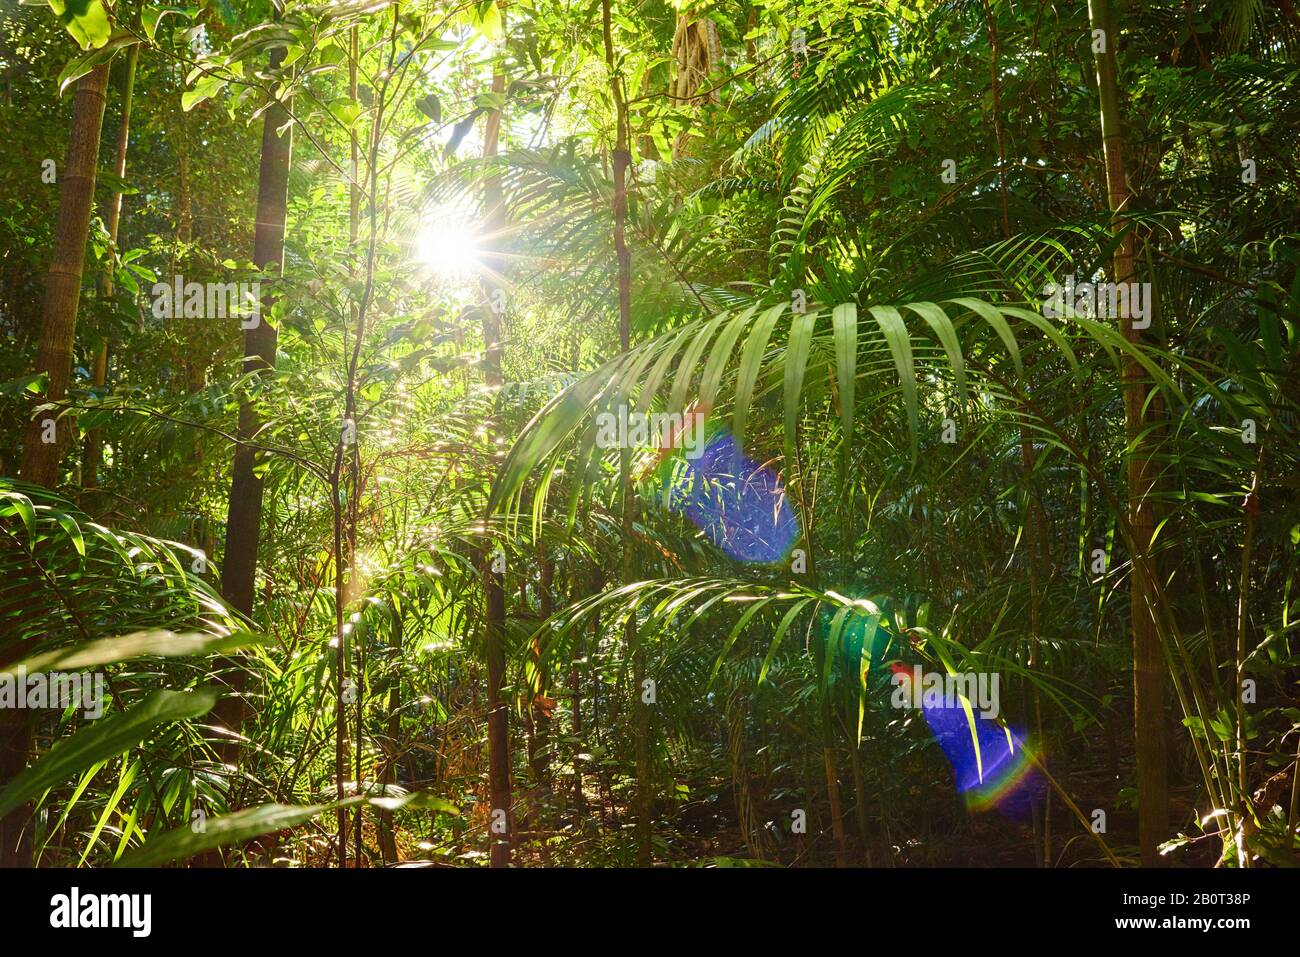 Archontophoenix (Archontophoenix cunninghamiana), sunbeams in a tropical rainforest with light refelxes, Australia, Queensland, Mary Cairncross Scenic Reserve Stock Photo